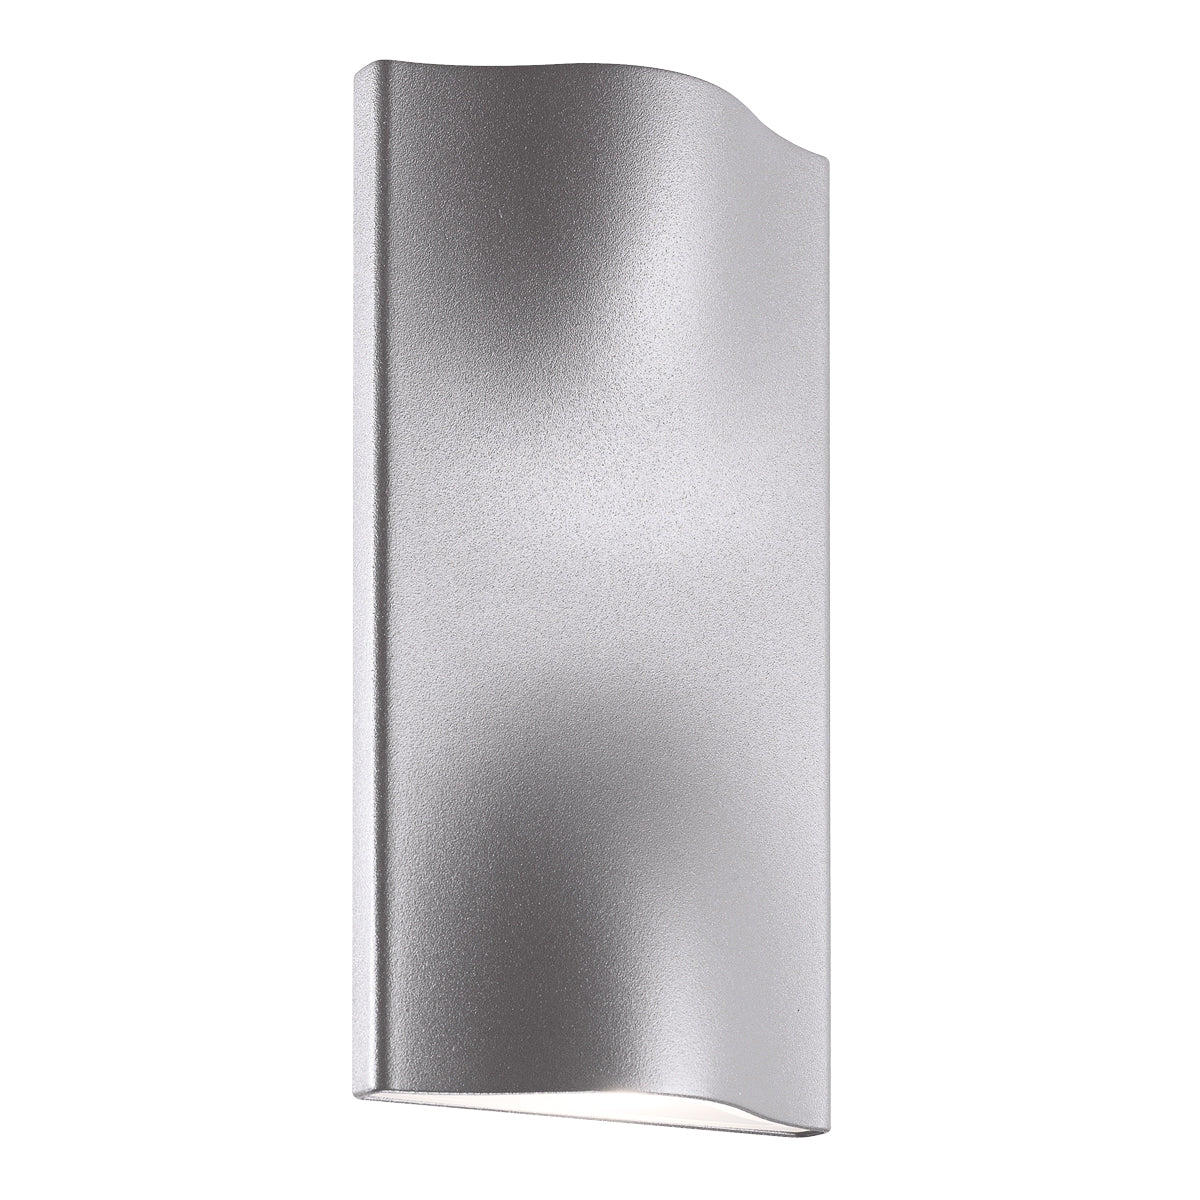 HAVEN Outdoor sconce Aluminum - 28278-016 INTEGRATED LED | EUROFASE